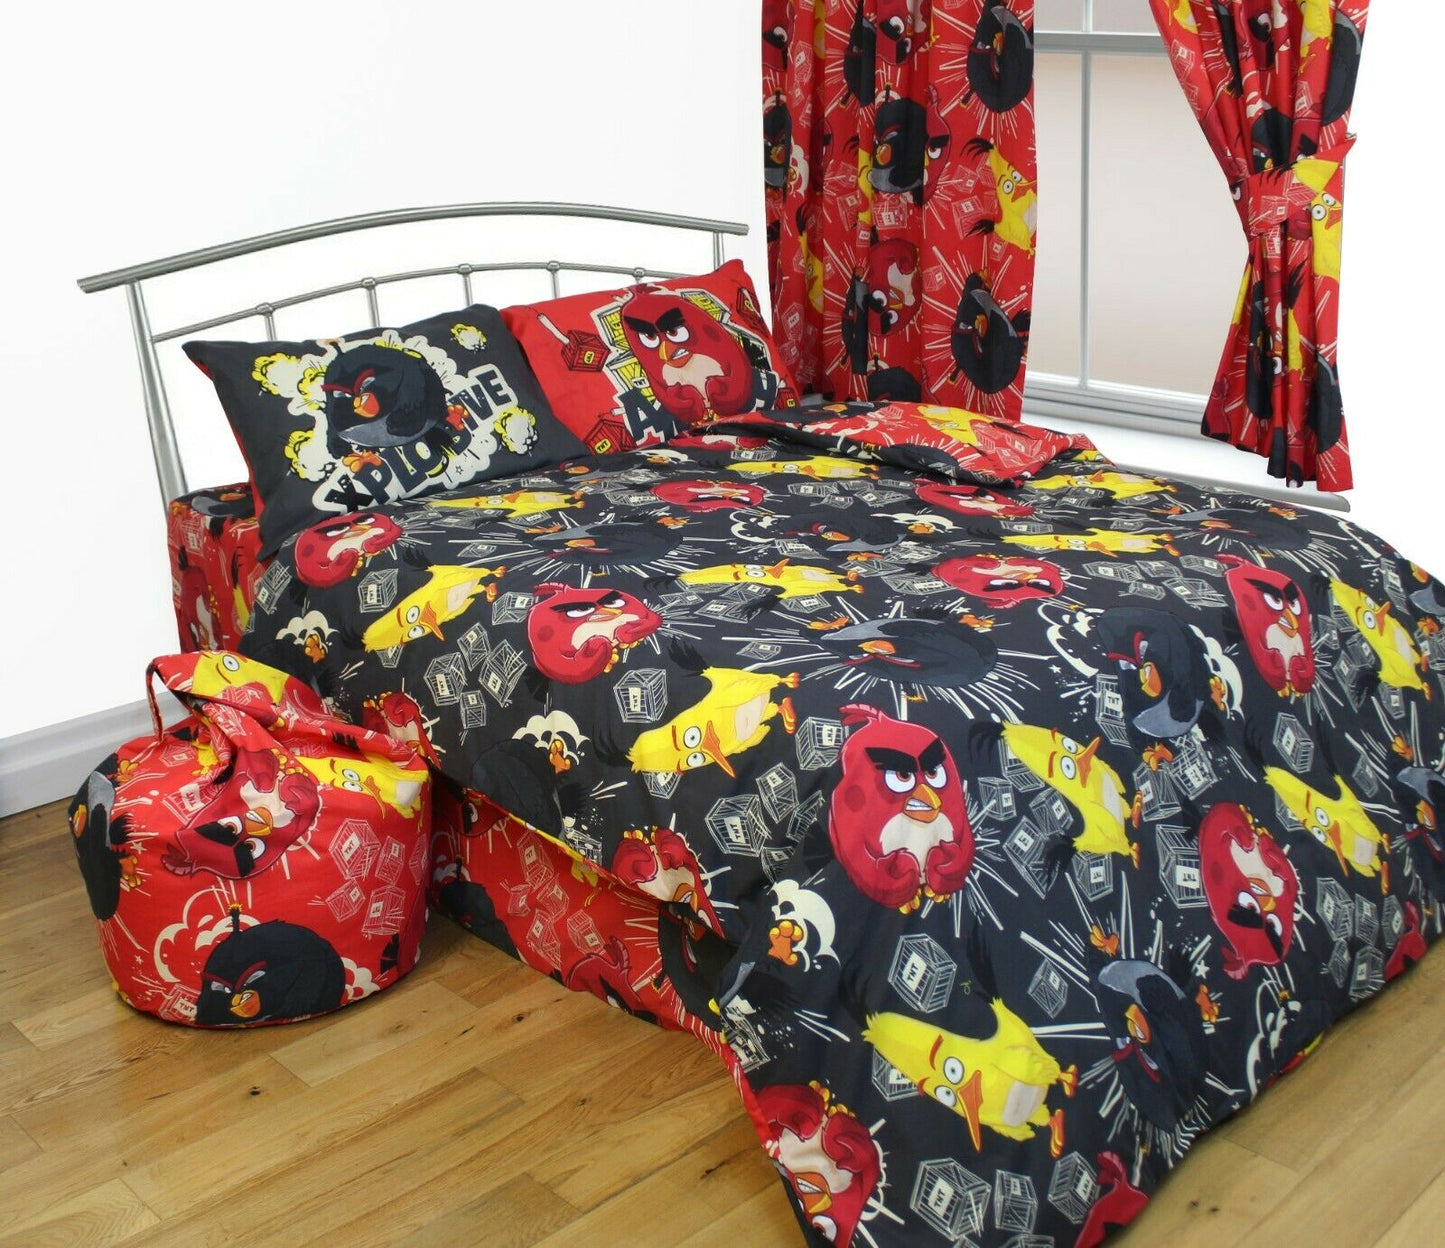 WHOLESALE PRICE FOR x 10 Double Bed Angry Birds TNT Red Black Reversible Duvet Cover Set Character Bedding